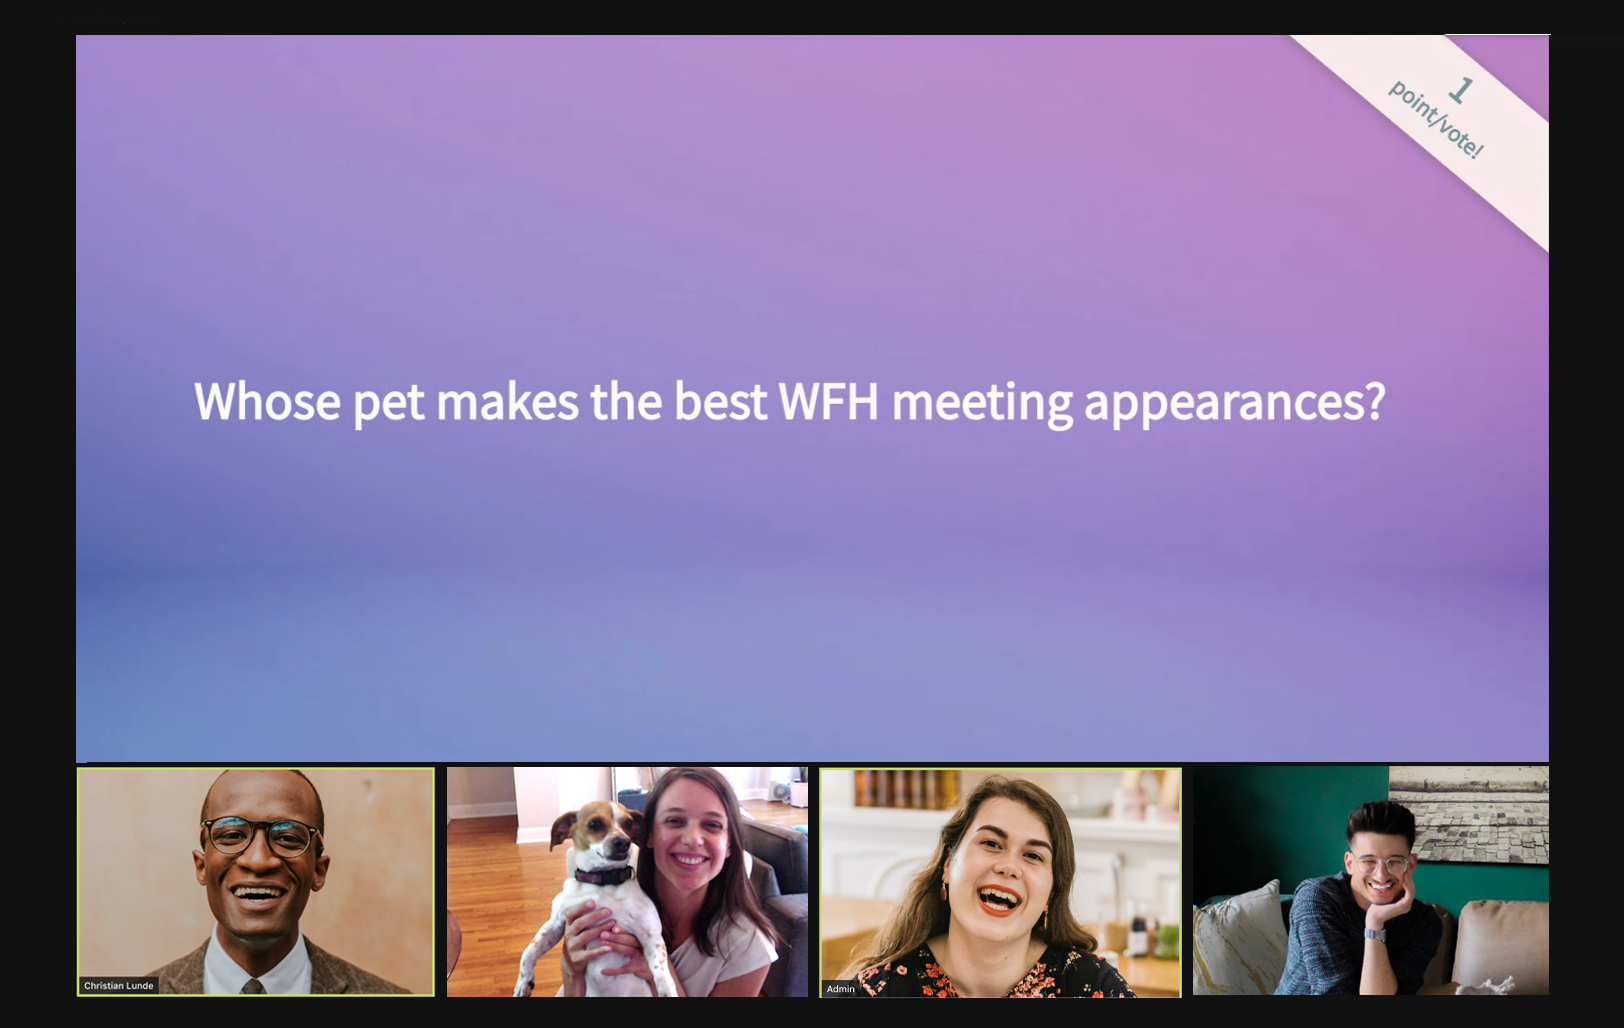 Get feedback from a vast remote working audience about Slides with Friends